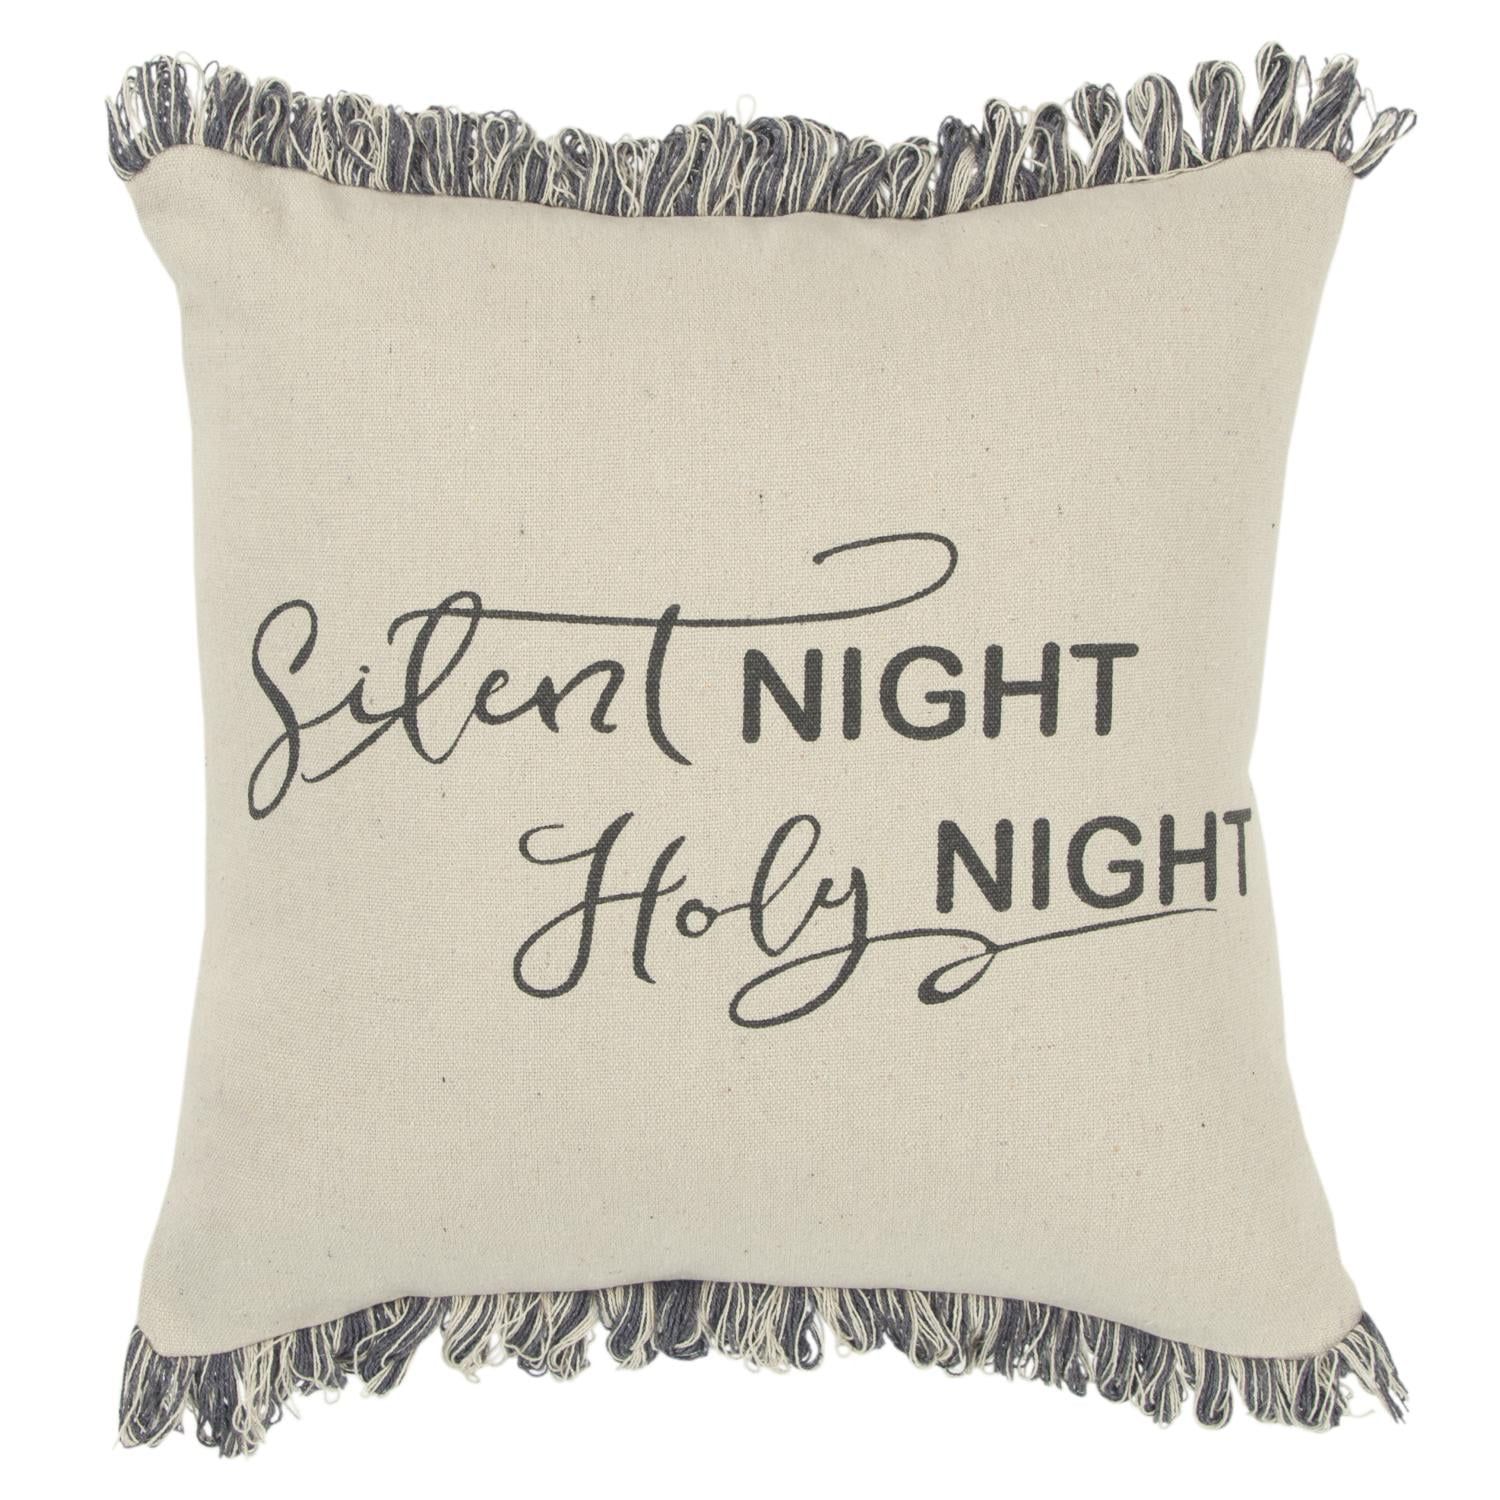 Rizzy Home Holiday "Silent Night Holy Night" Decorative Throw Pillow Cover, 20" x 20", Natural - ... | Walmart (US)